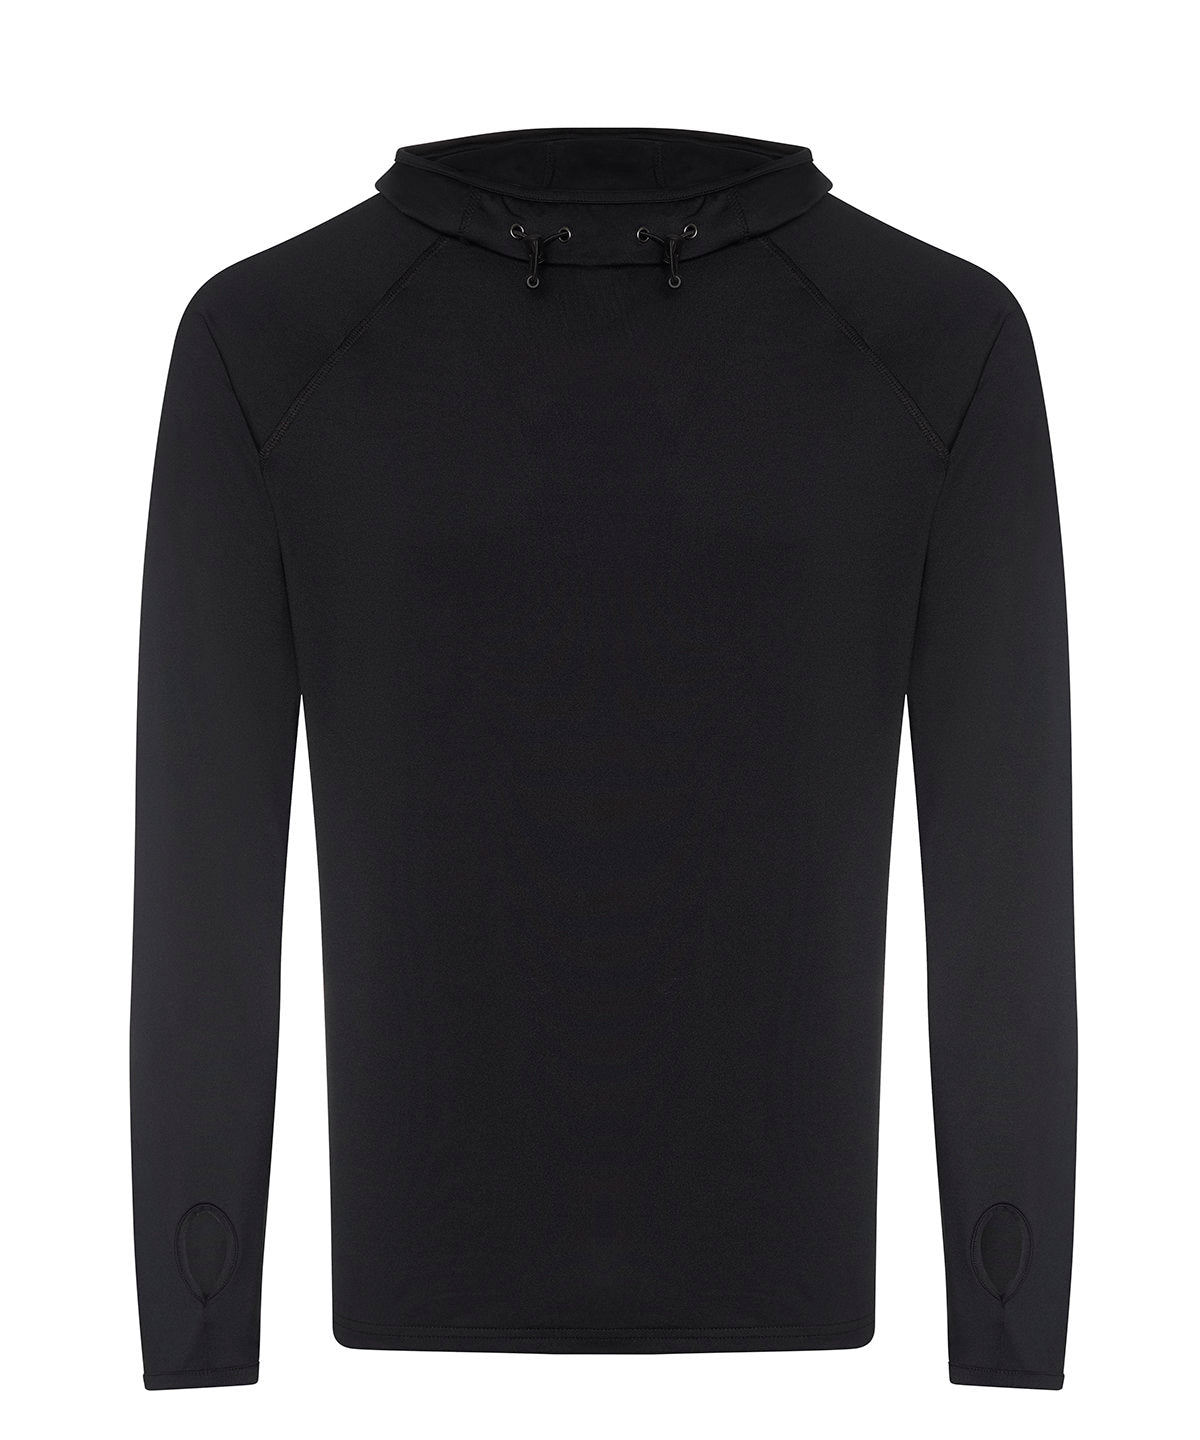 Personalised Sports Overtops - Black AWDis Just Cool Cool cowl neck top